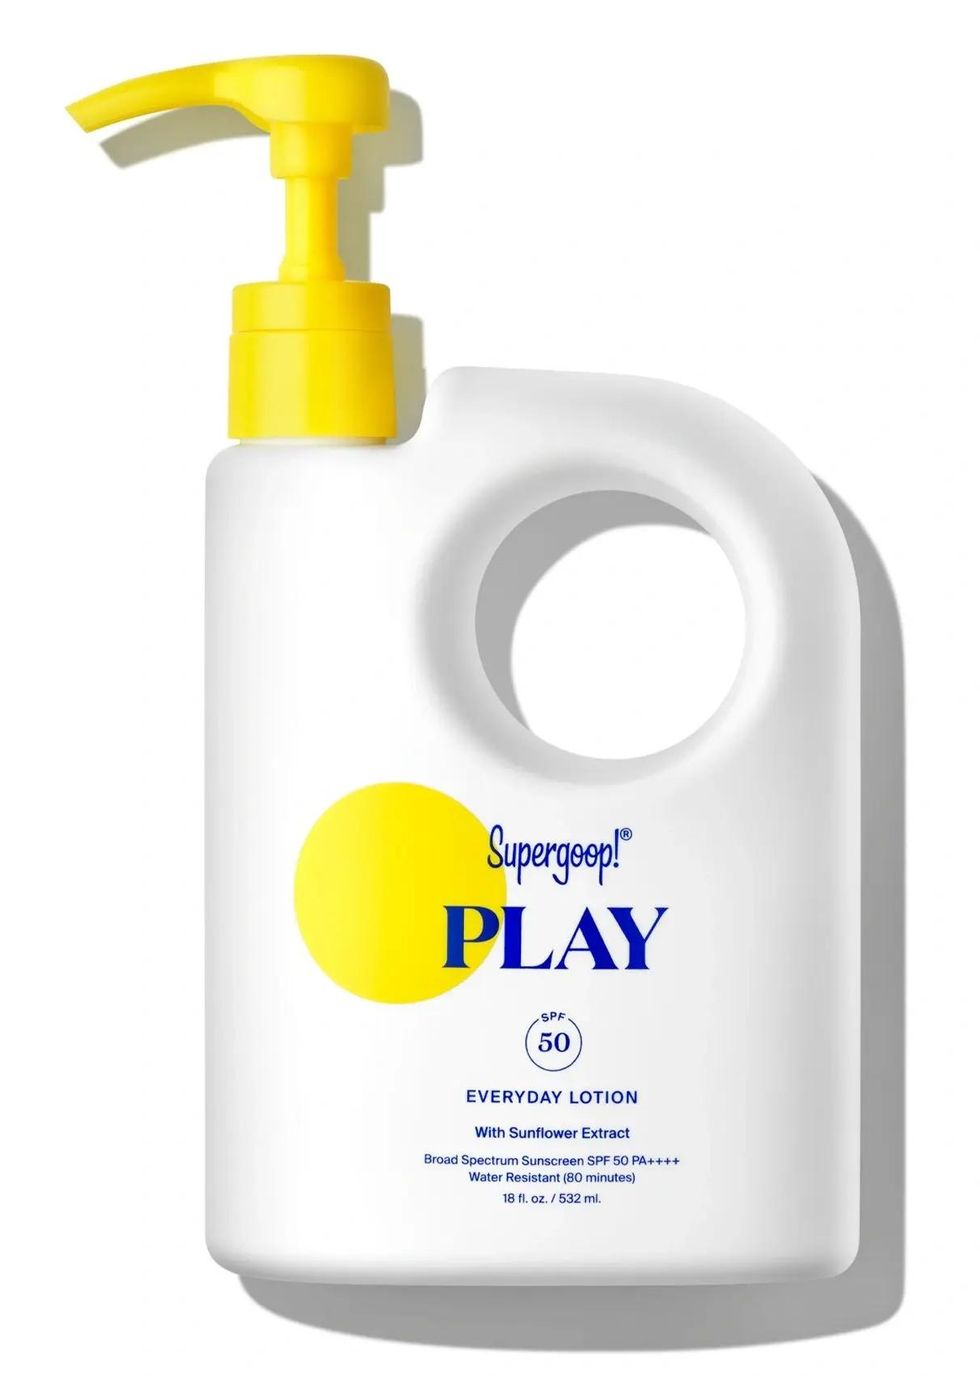 PLAY Everyday Lotion SPF 50 with Sunflower Extract - 18 fl. oz.